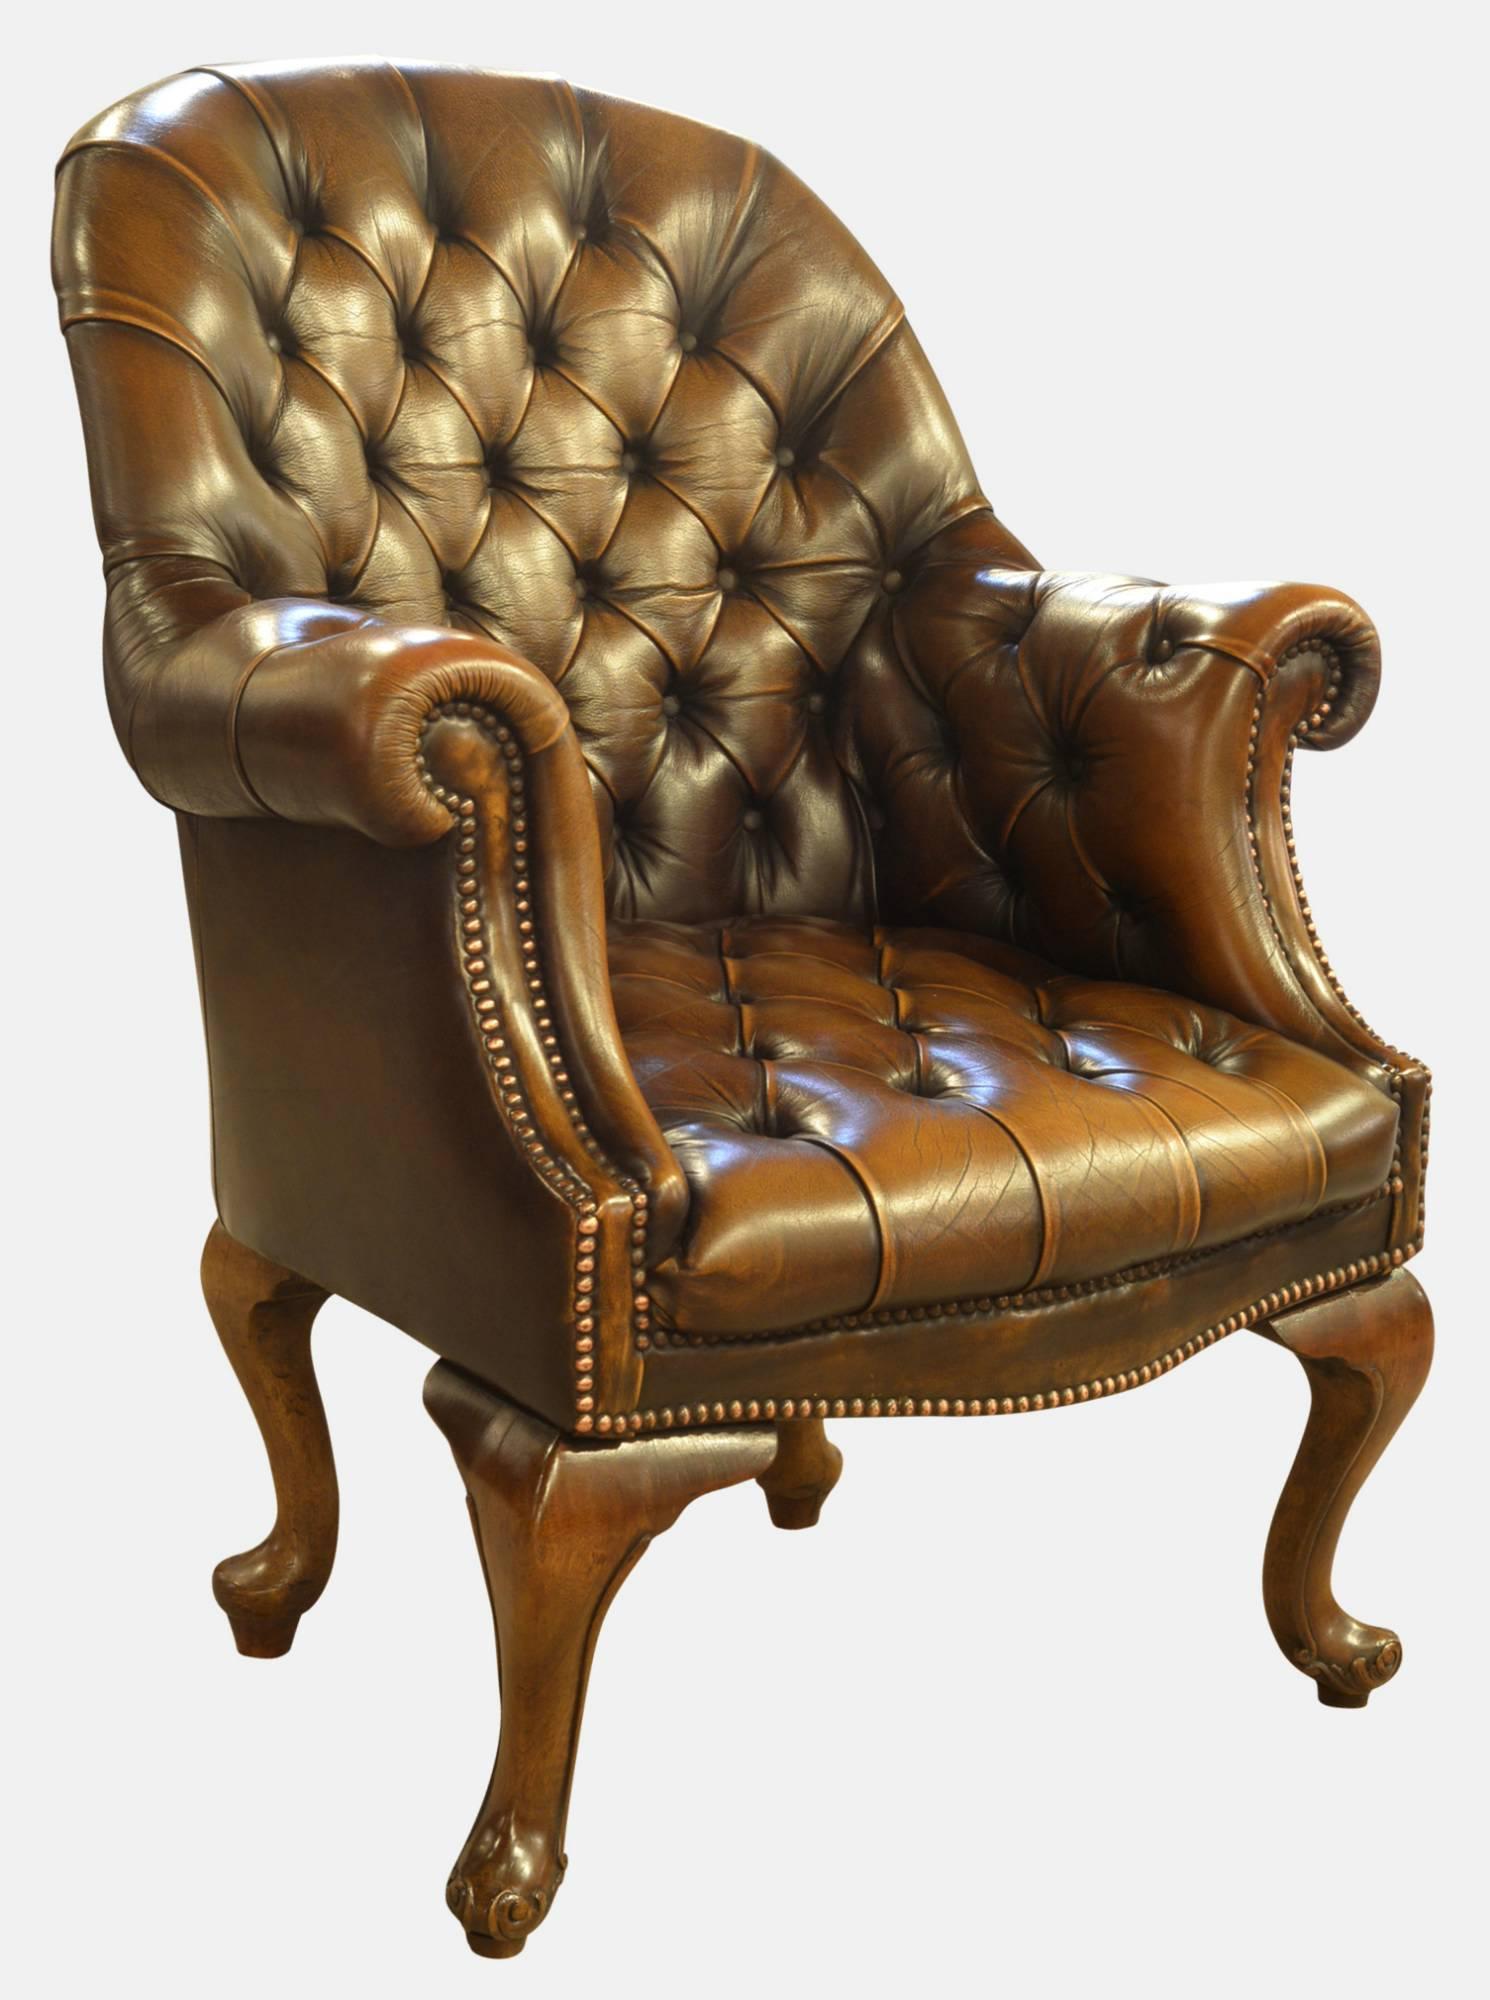 Queen Anne style walnut and leather library chair,

circa 1950s.